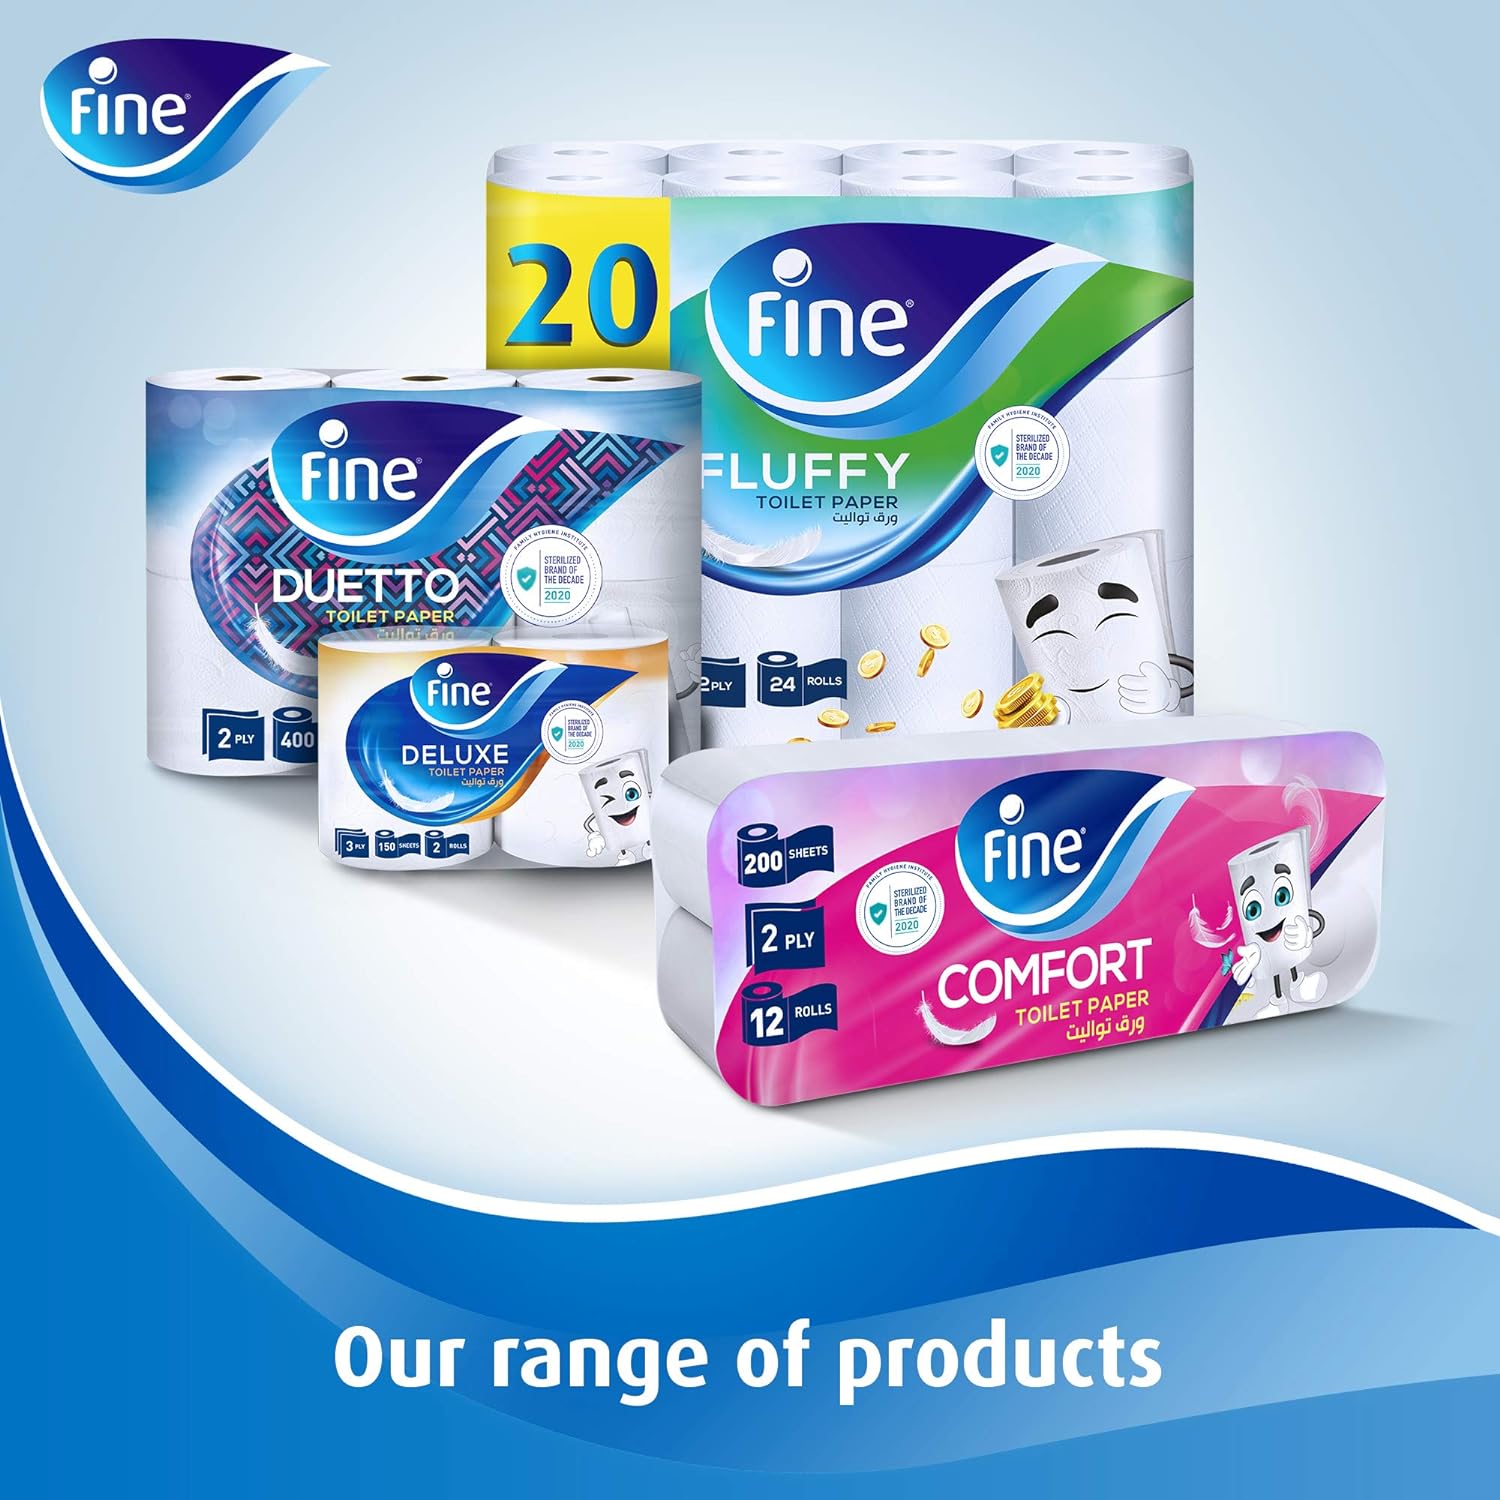 Fine Deluxe, Highly Absorbent, Sterilized, Soft & Strong, Flushable Toilet Paper, 3 Plies, Pack of 24 Rolls. New & Improved